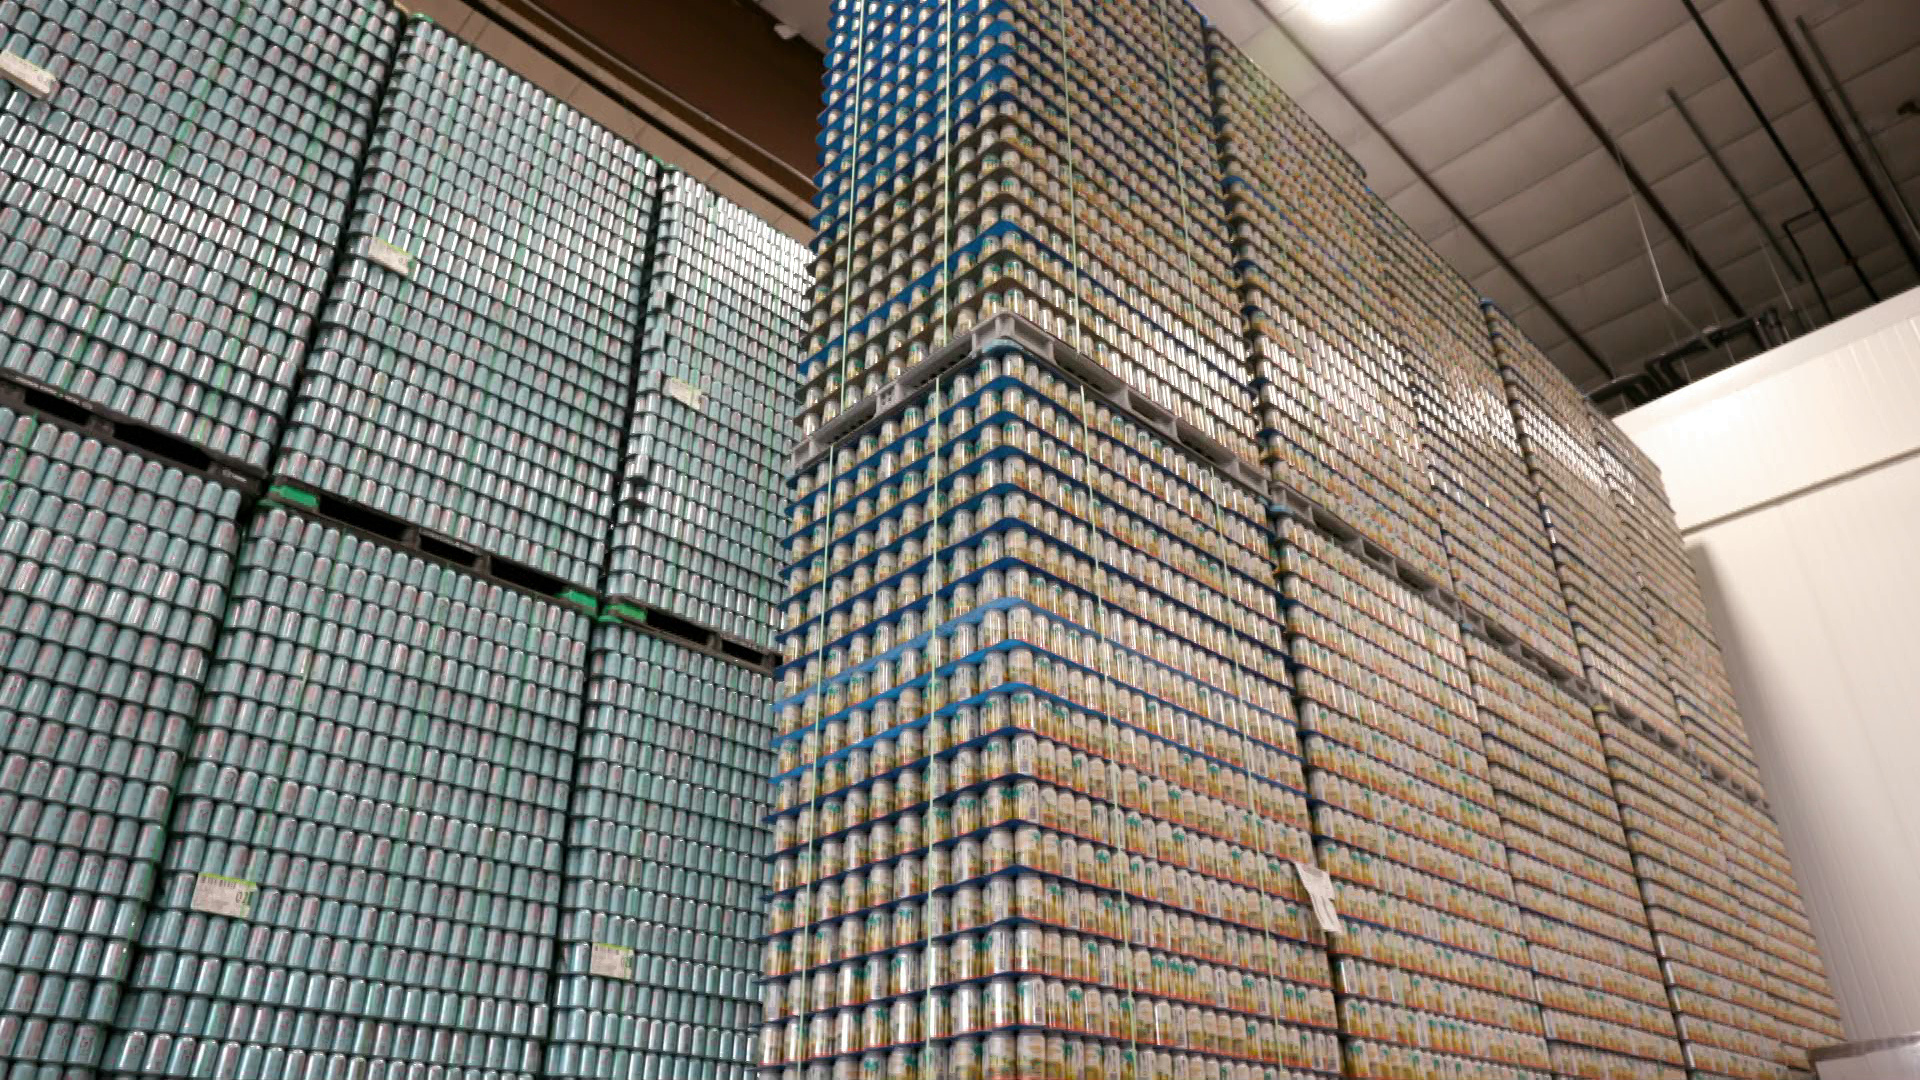 Pallets of cans sit stacked from floor to ceiling in a warehouse-sized room.